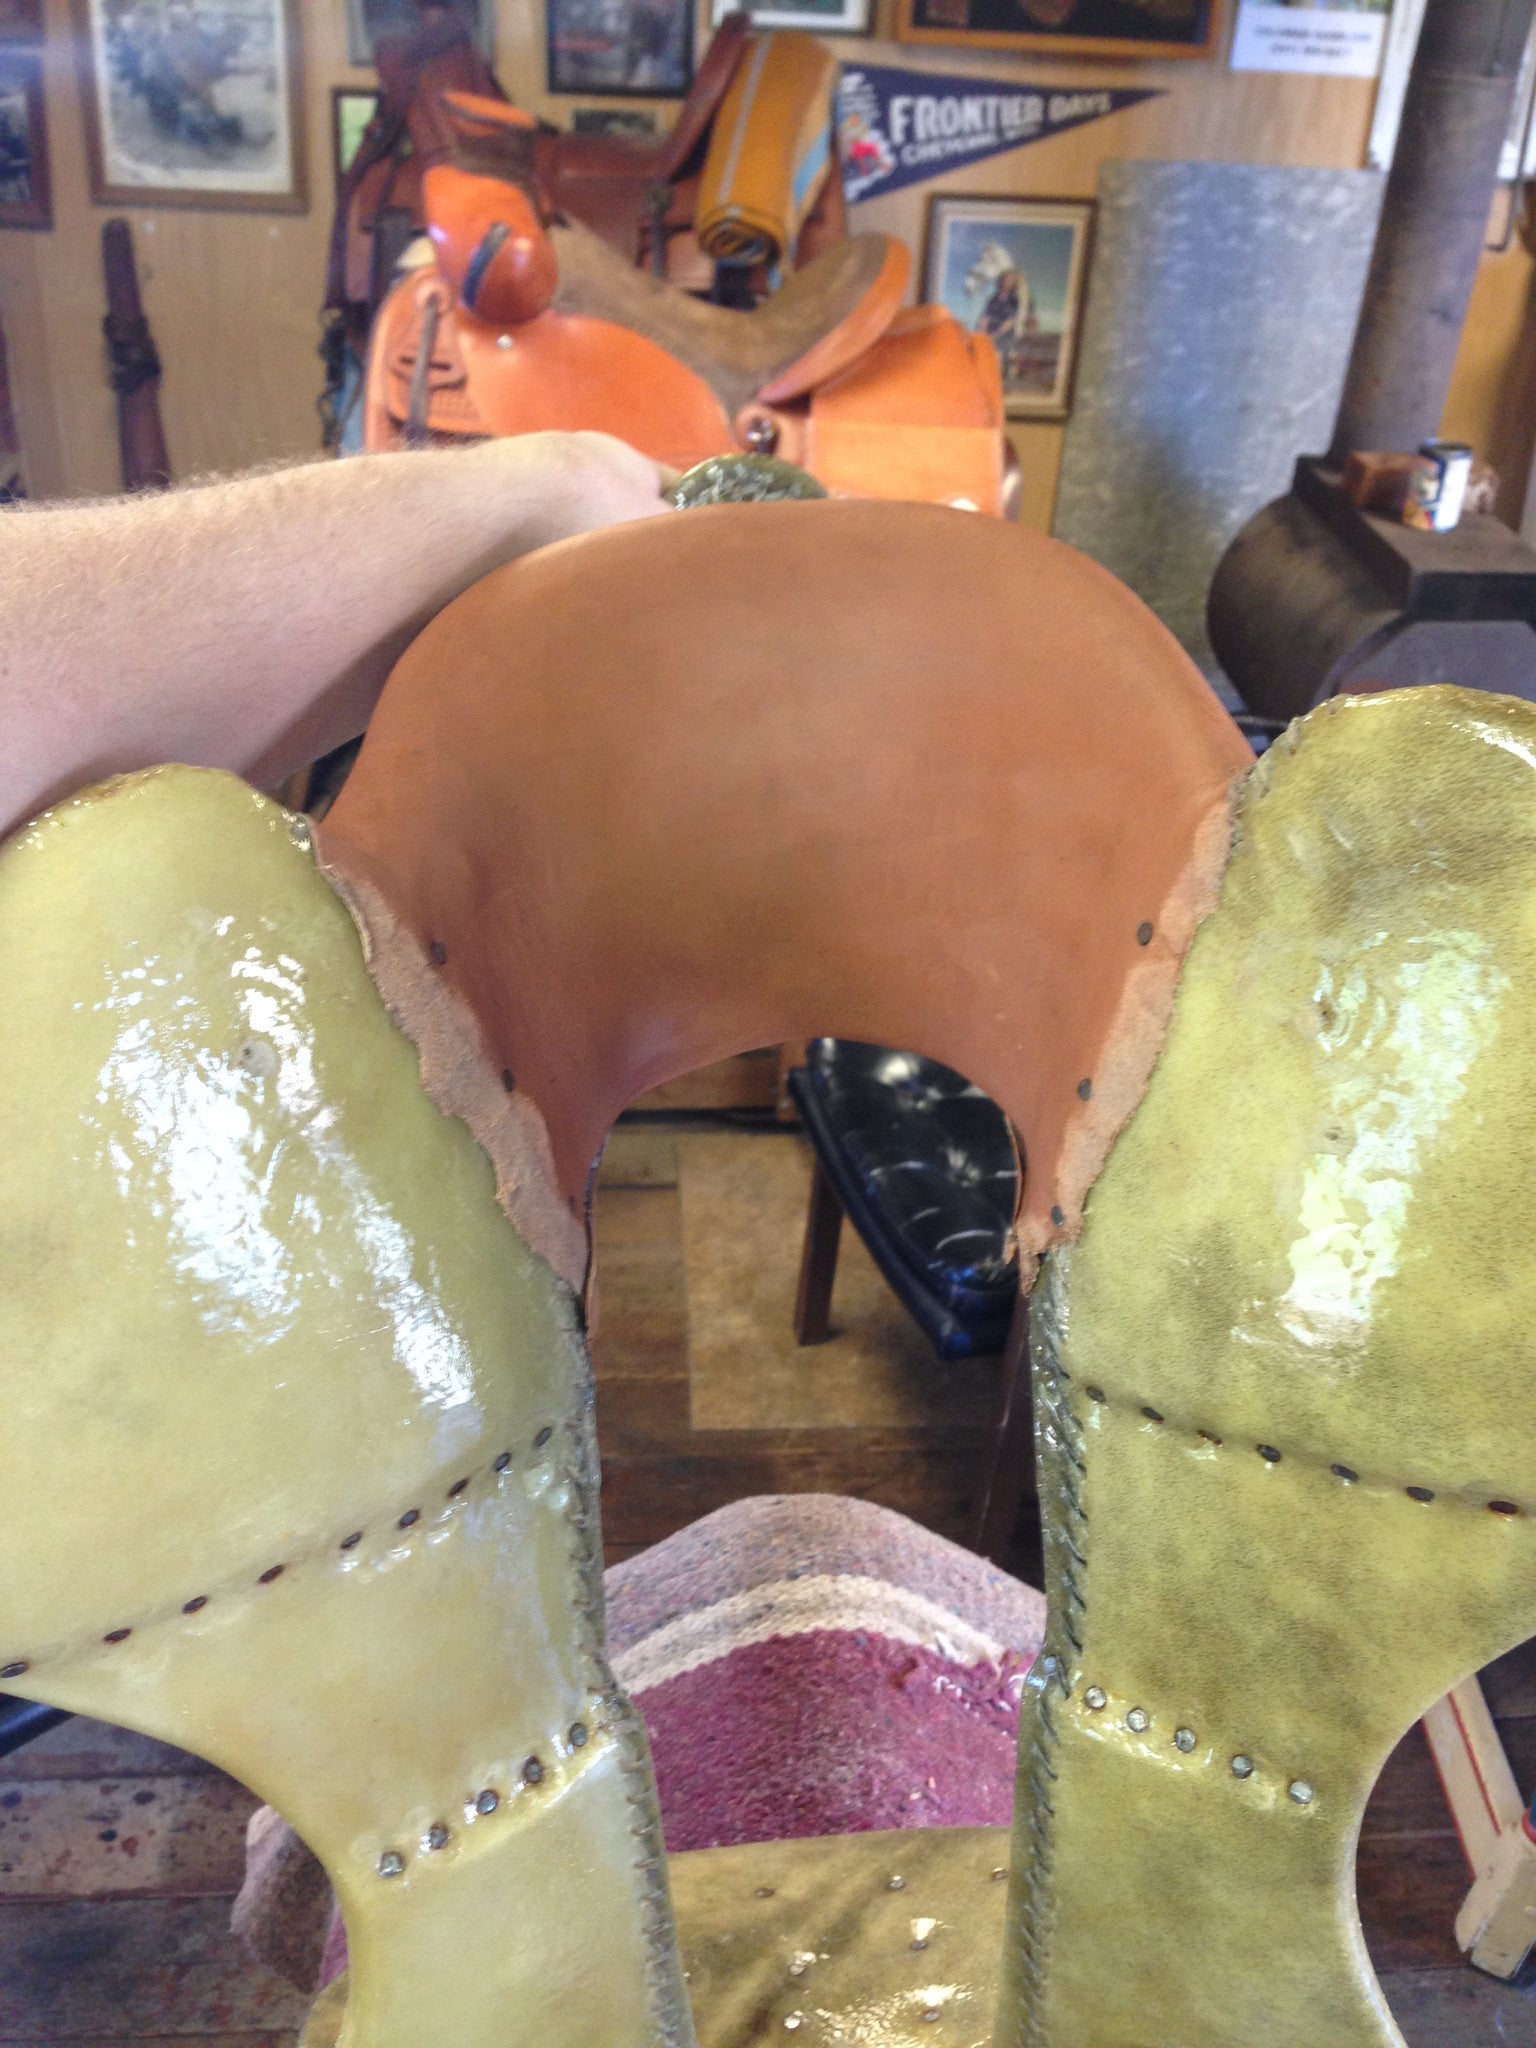 Old Style Custom Western Saddle - Pistol Annie's Boutique